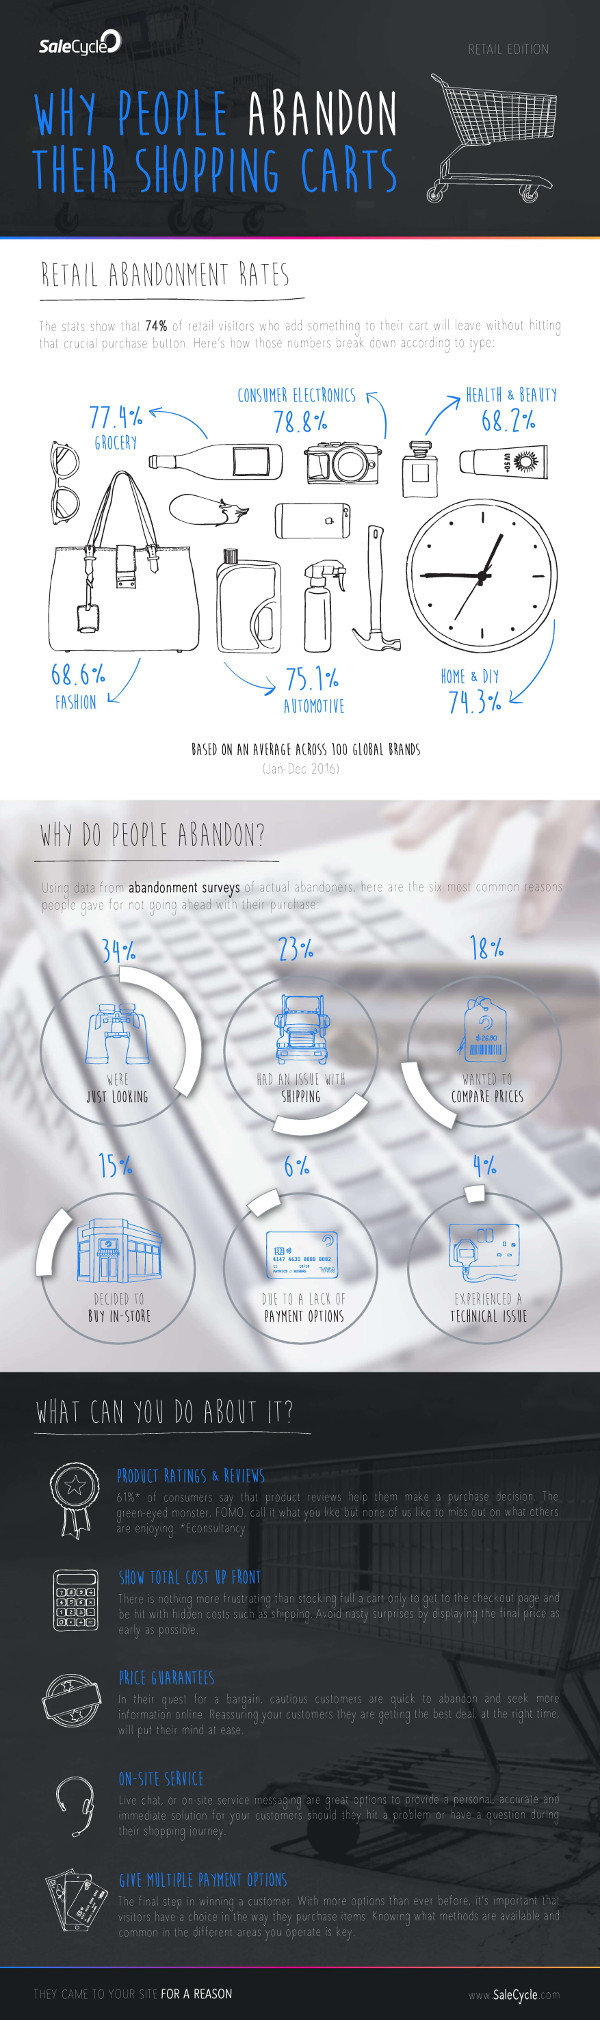 170526-infographic-why-people-abandon-shopping-carts-small